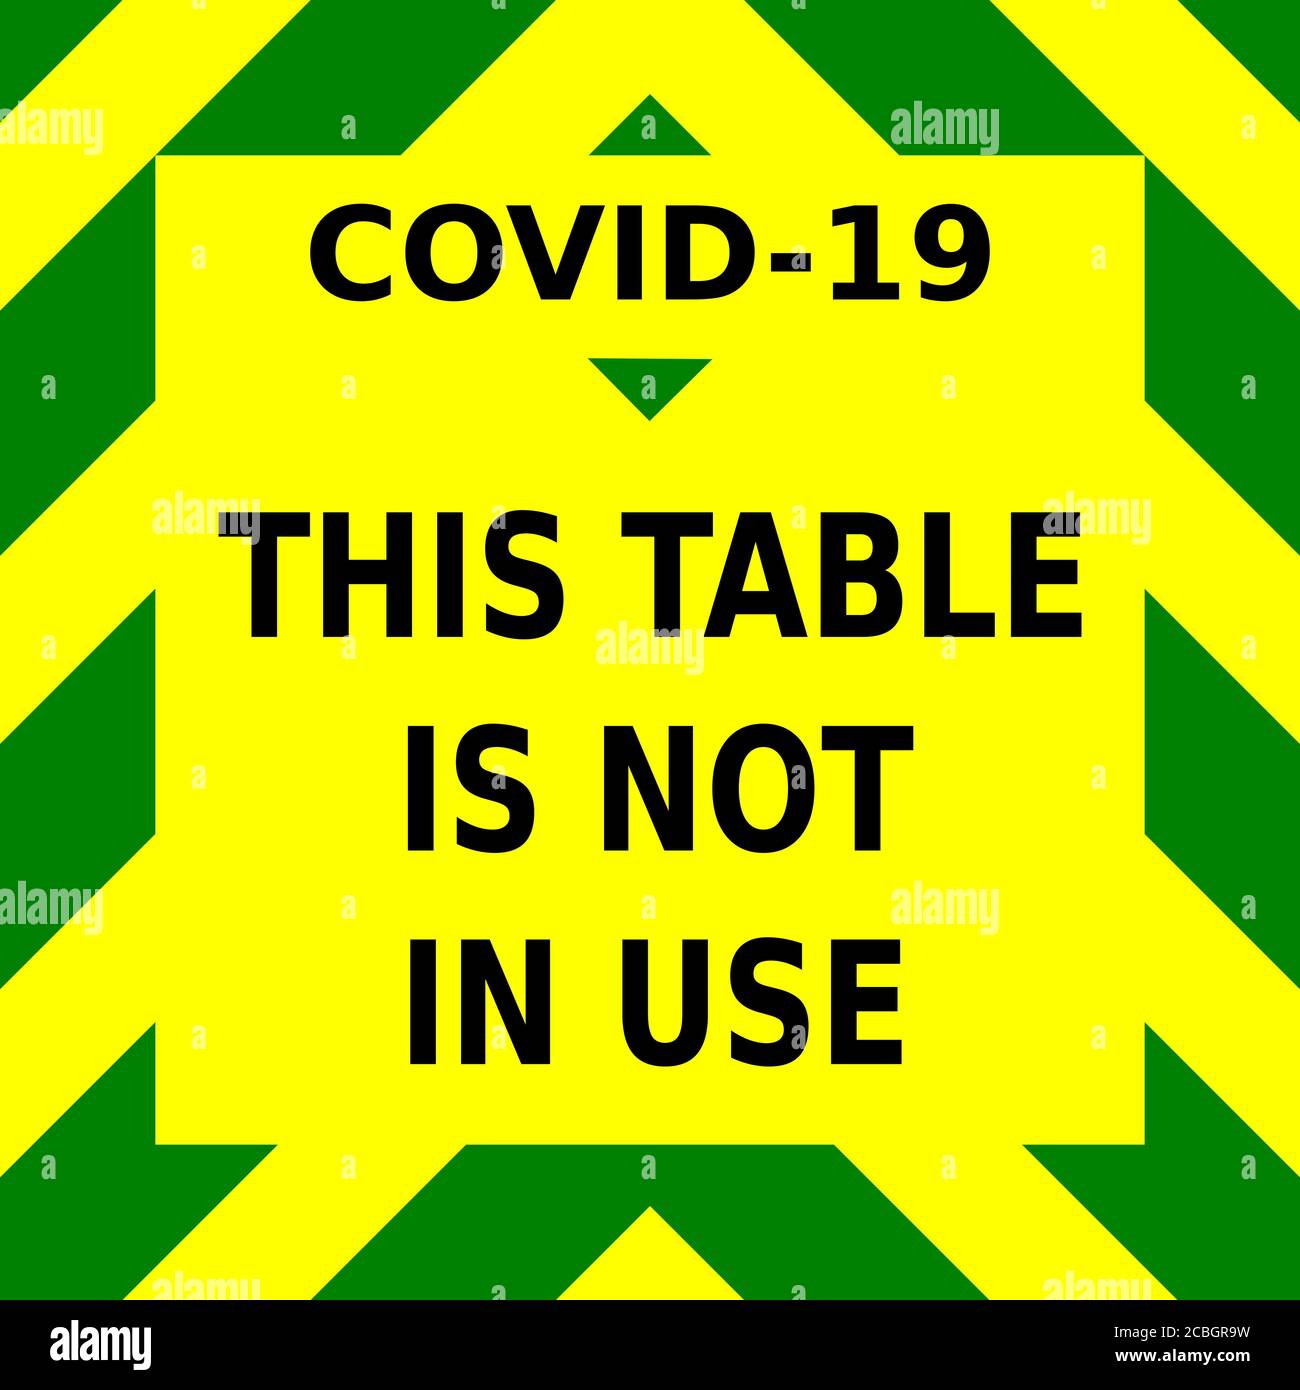 Green and yellow vector graphic, informing people that this table is not in use, as part of the measures to help stop the spread of the covid-19 virus Stock Vector